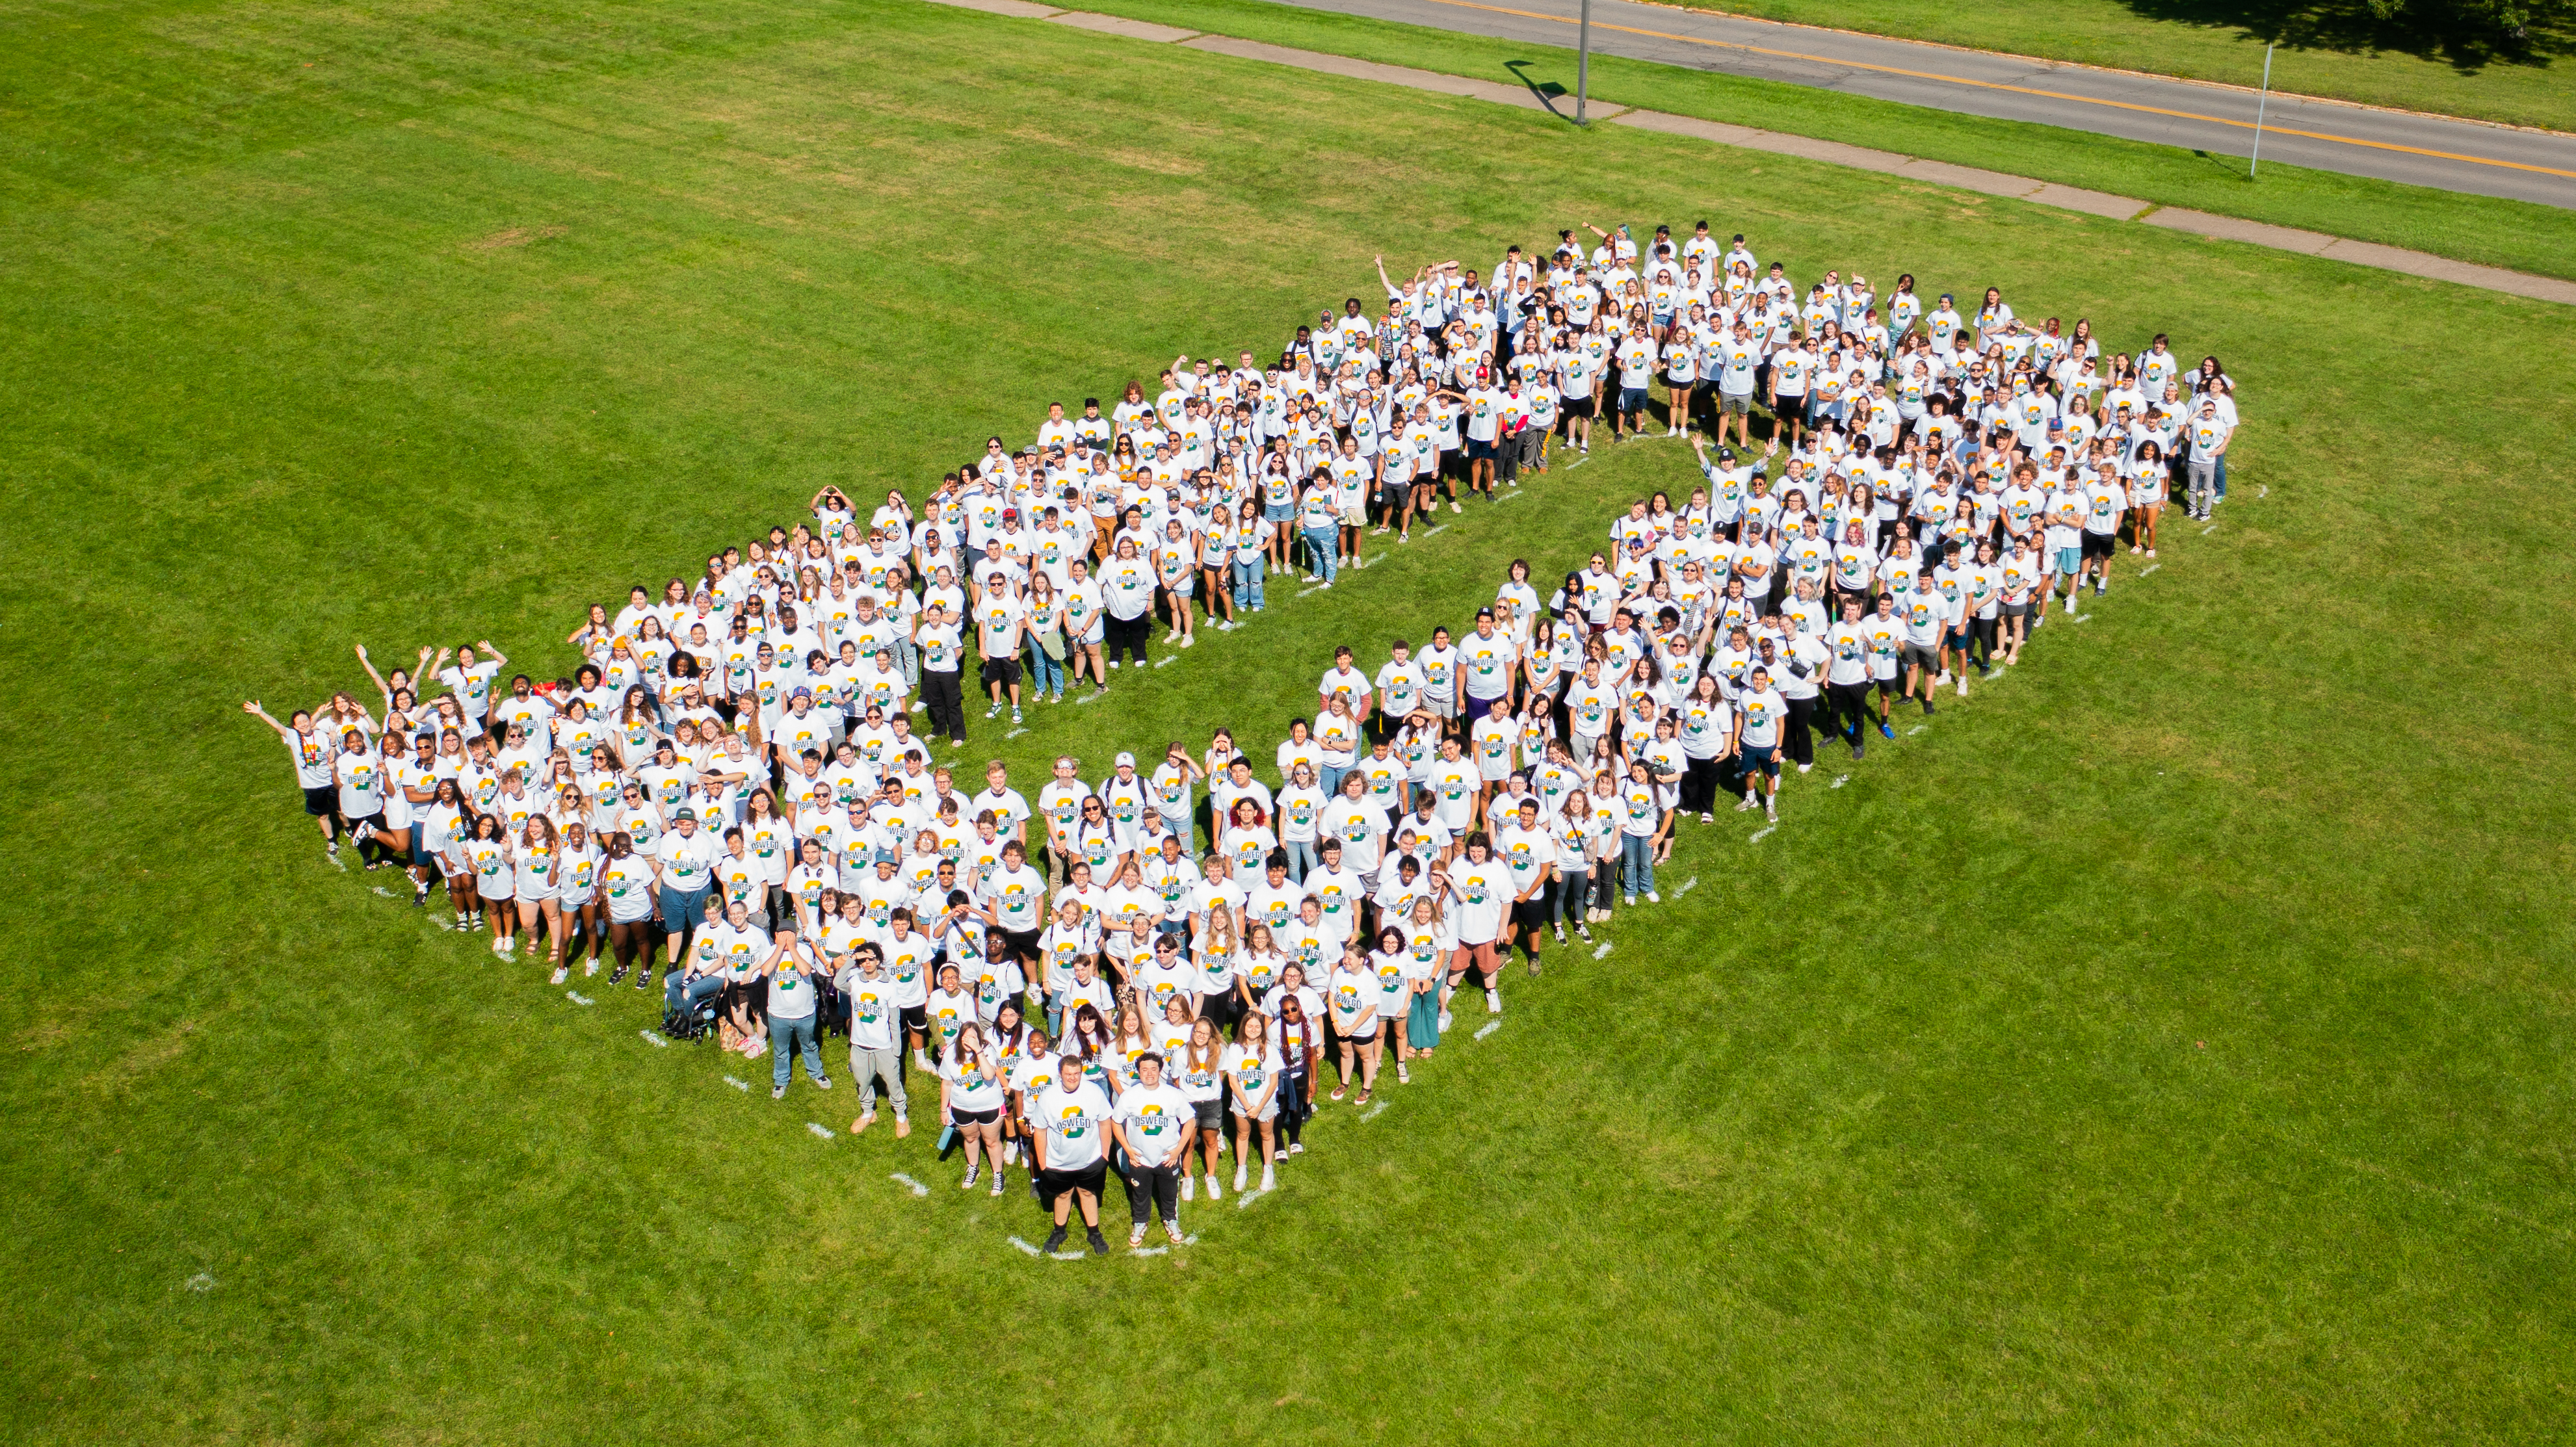 First-year students took part in a new tradition during Laker Launch in forming a giant O as a team-building and school-pride activity.